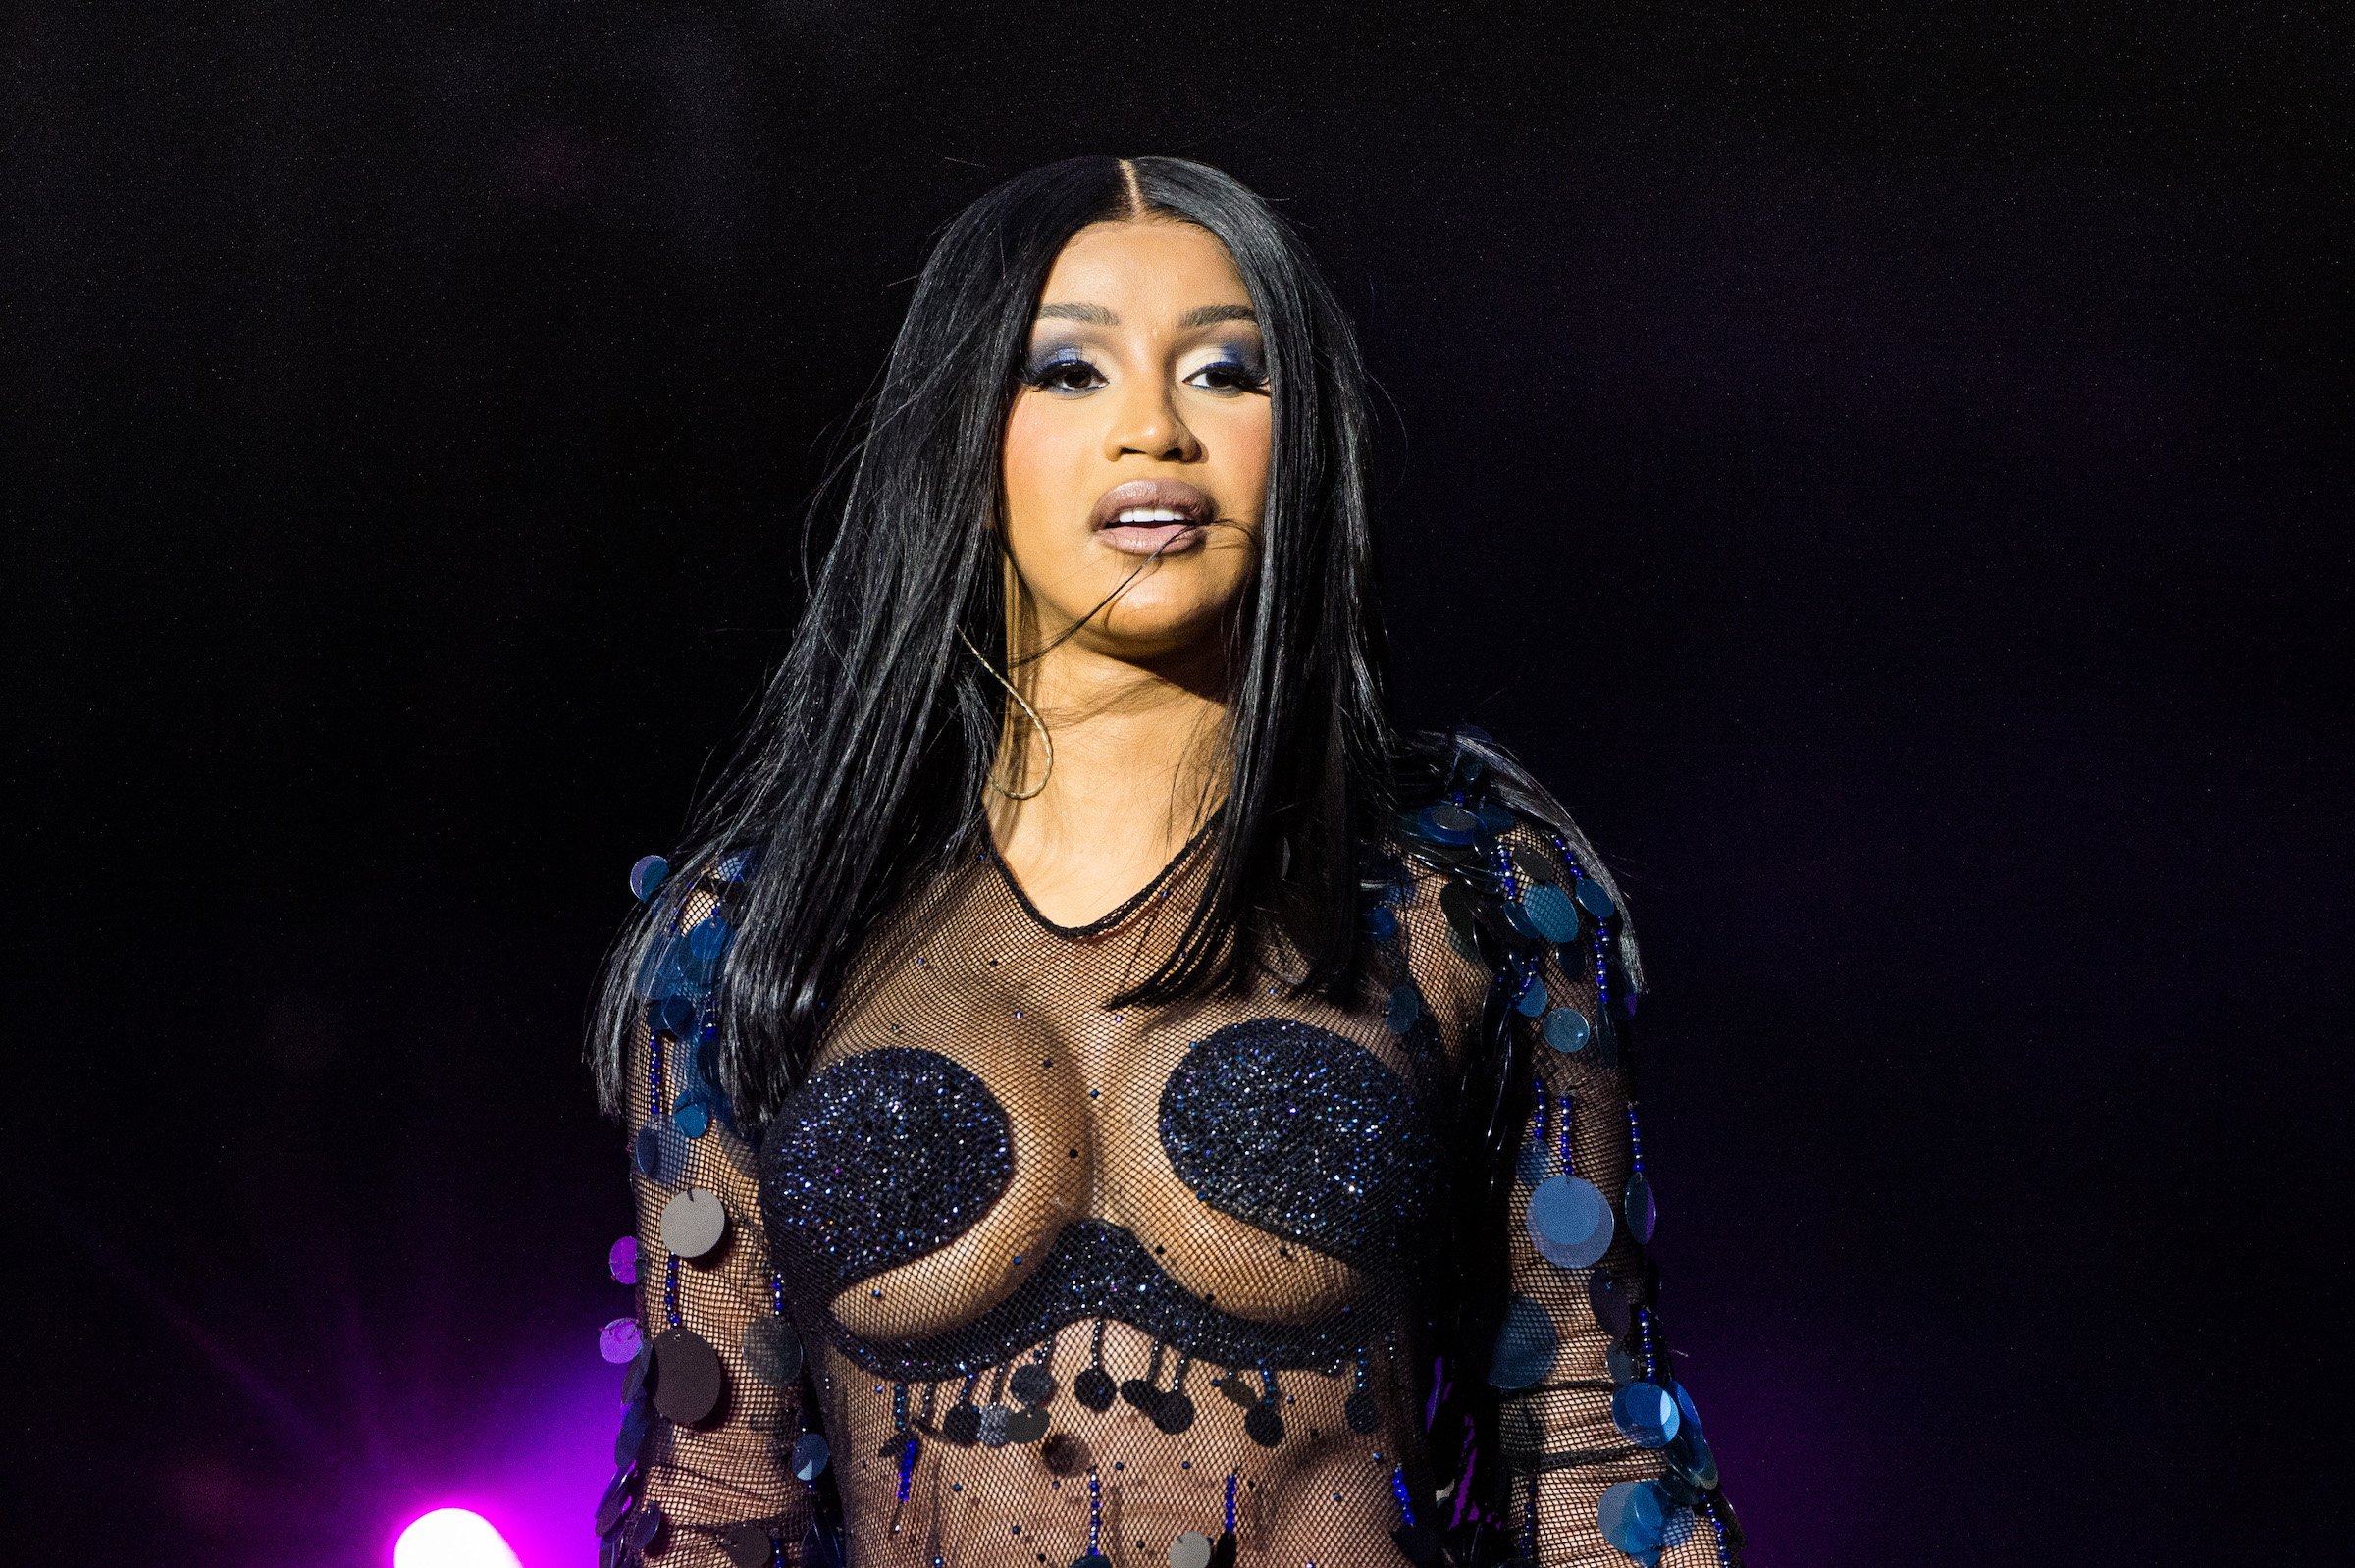 Cardi B, who uses onions for her hair, wearing a black outfit on stage